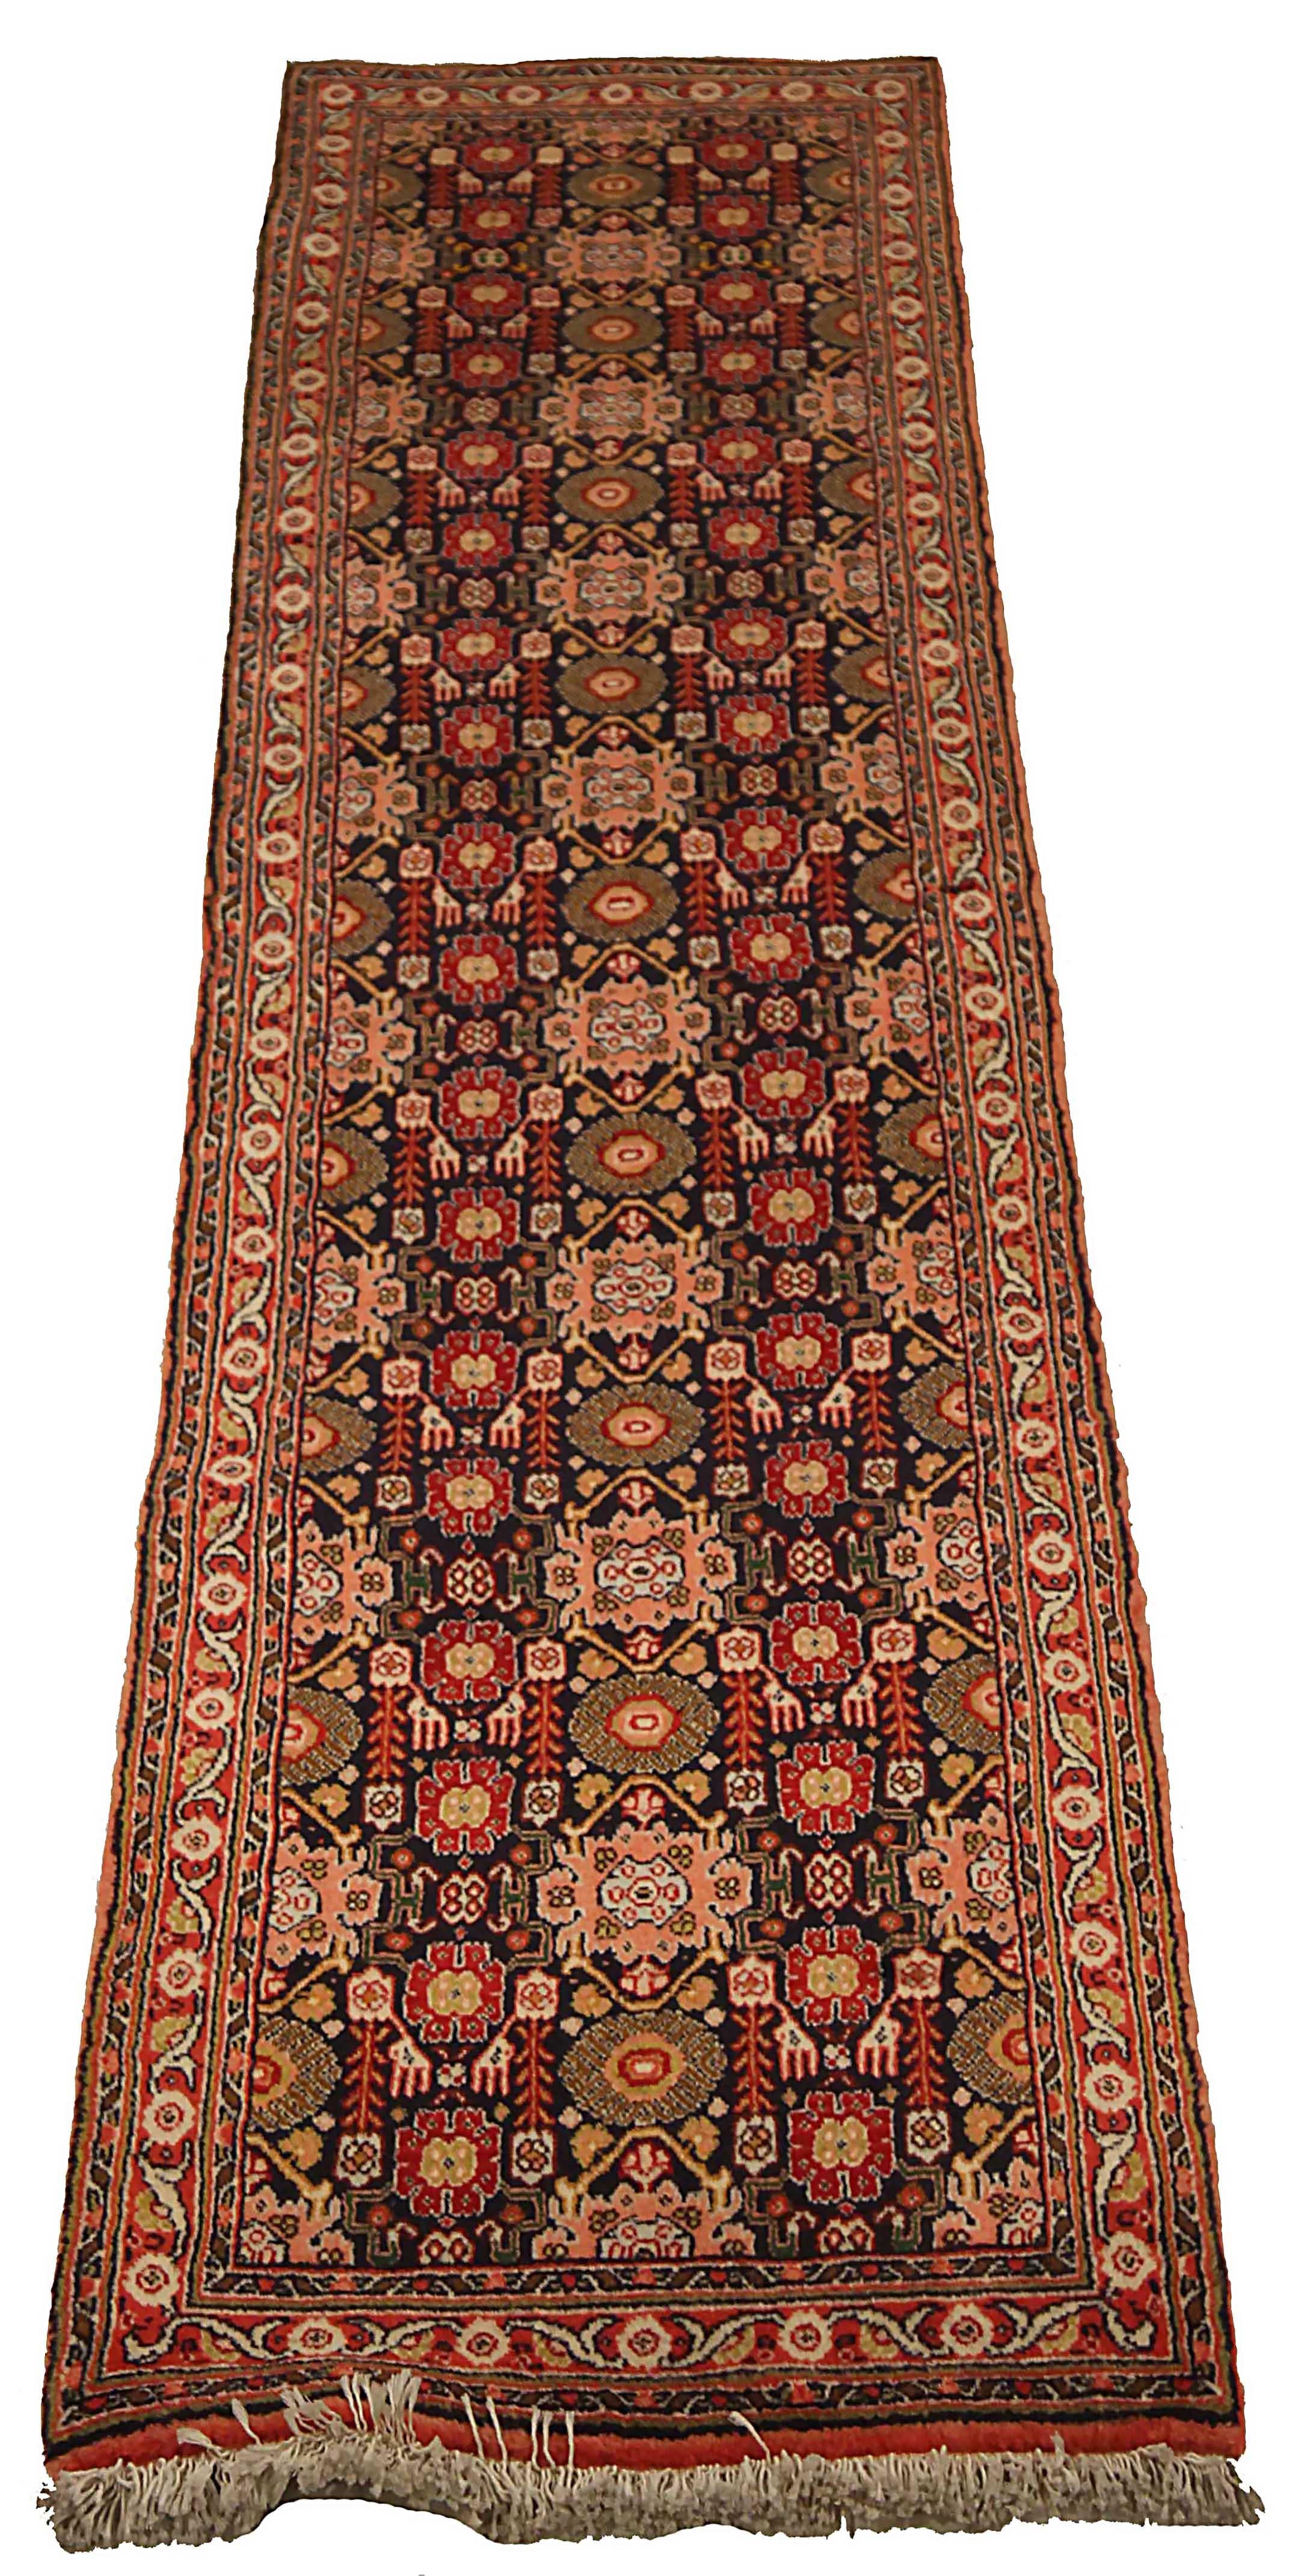 Antique Persian runner rug handwoven from the finest sheep’s wool. It’s colored with all-natural vegetable dyes that are safe for humans and pets. It’s a traditional Kurdish design handwoven by expert artisans. It’s a lovely runner rug that can be